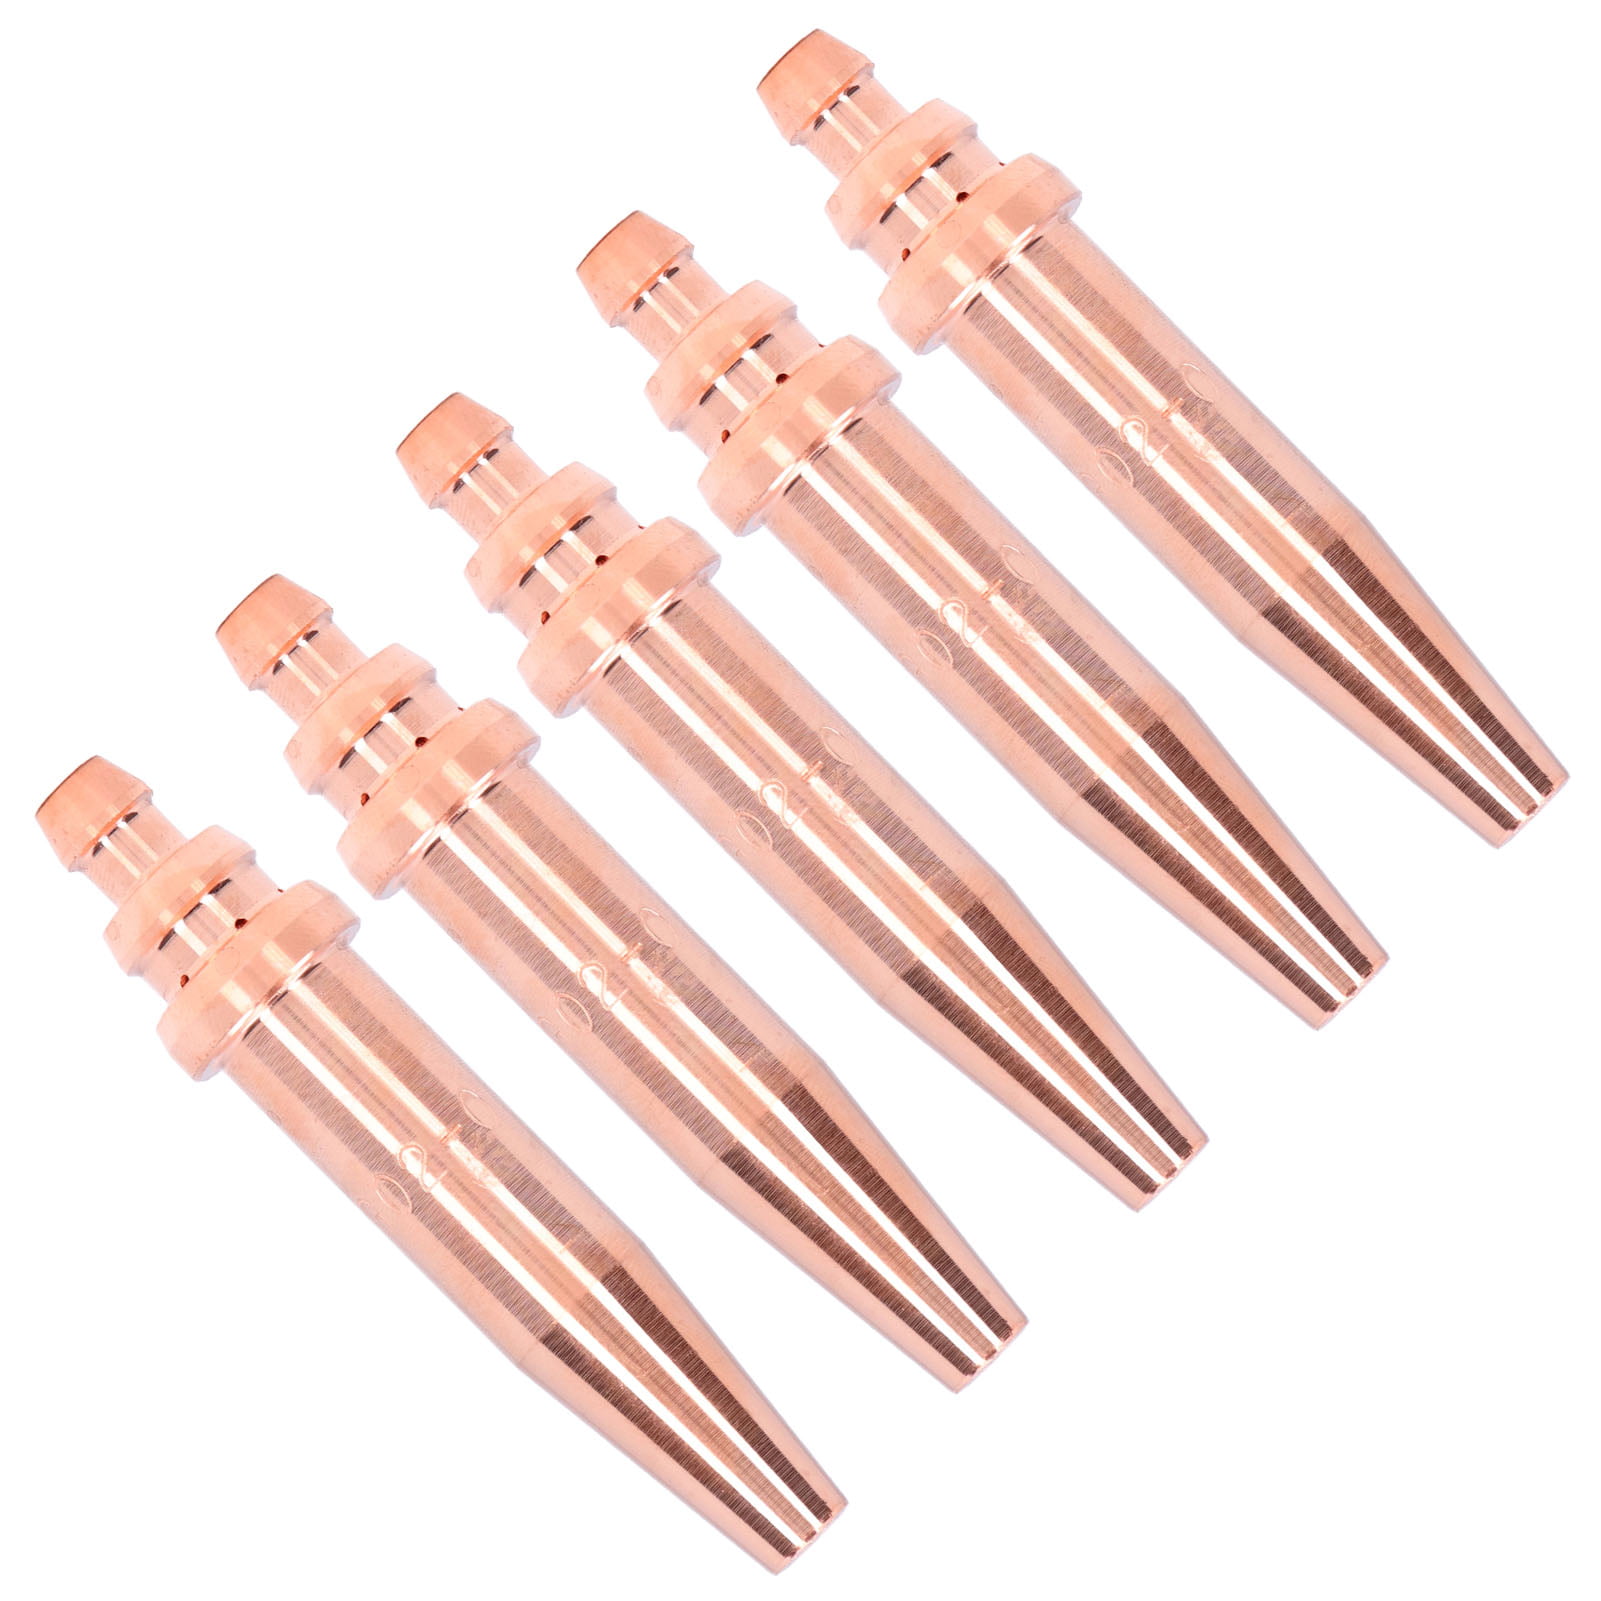 5Pcs G02-1 Acetylene Cutting Torch Tips Isobaric Cutting Tips Copper Cutting Nozzles Torch Consumables 